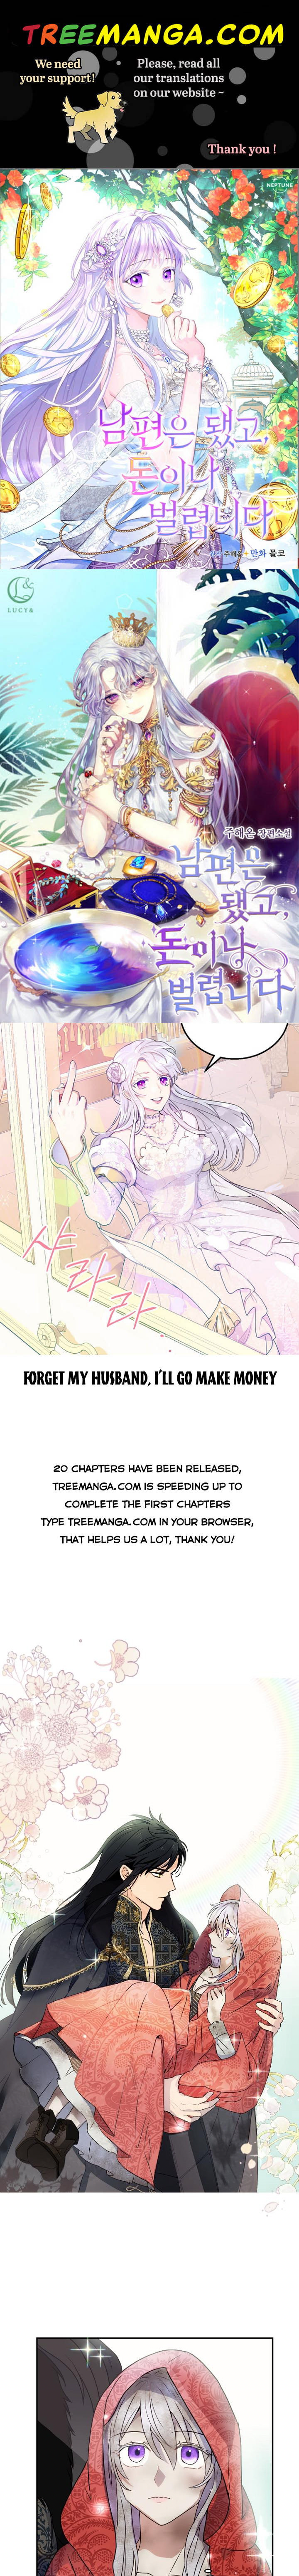 Forget My Husband, I’Ll Go Make Money - Page 1